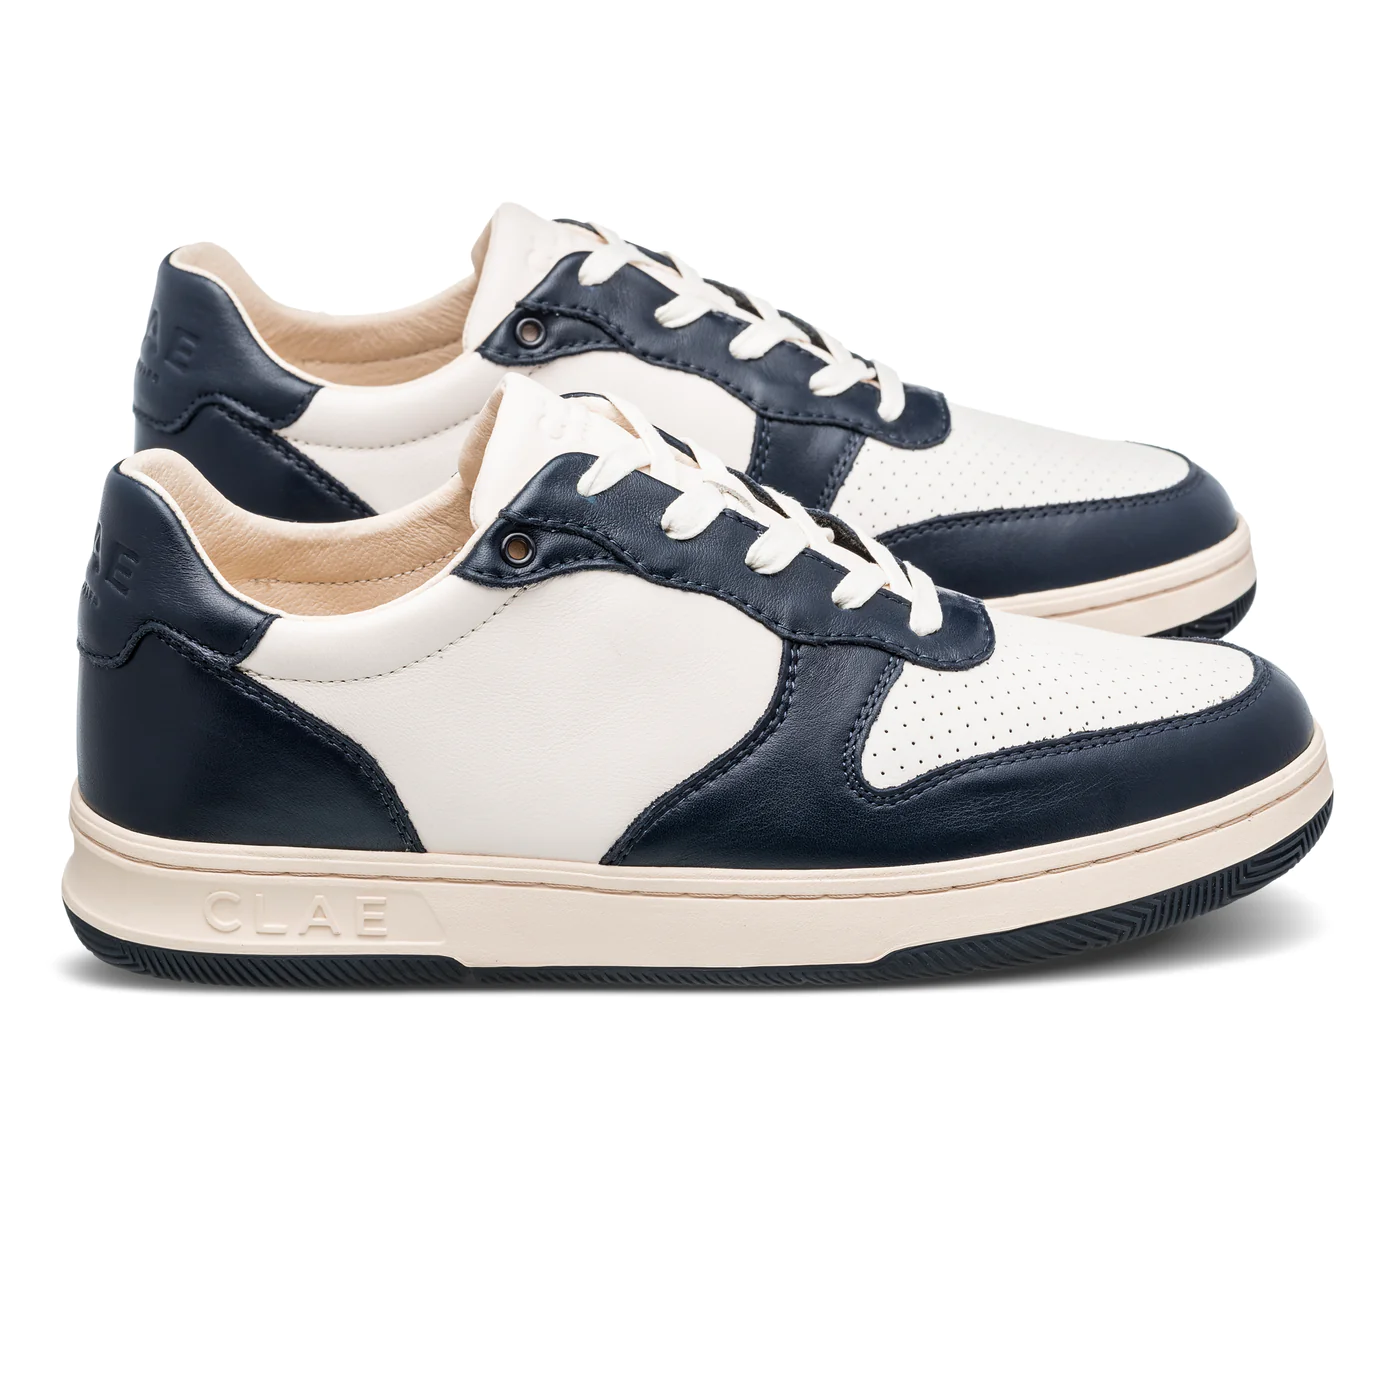 Clae Malone-Navy Leather Off -White